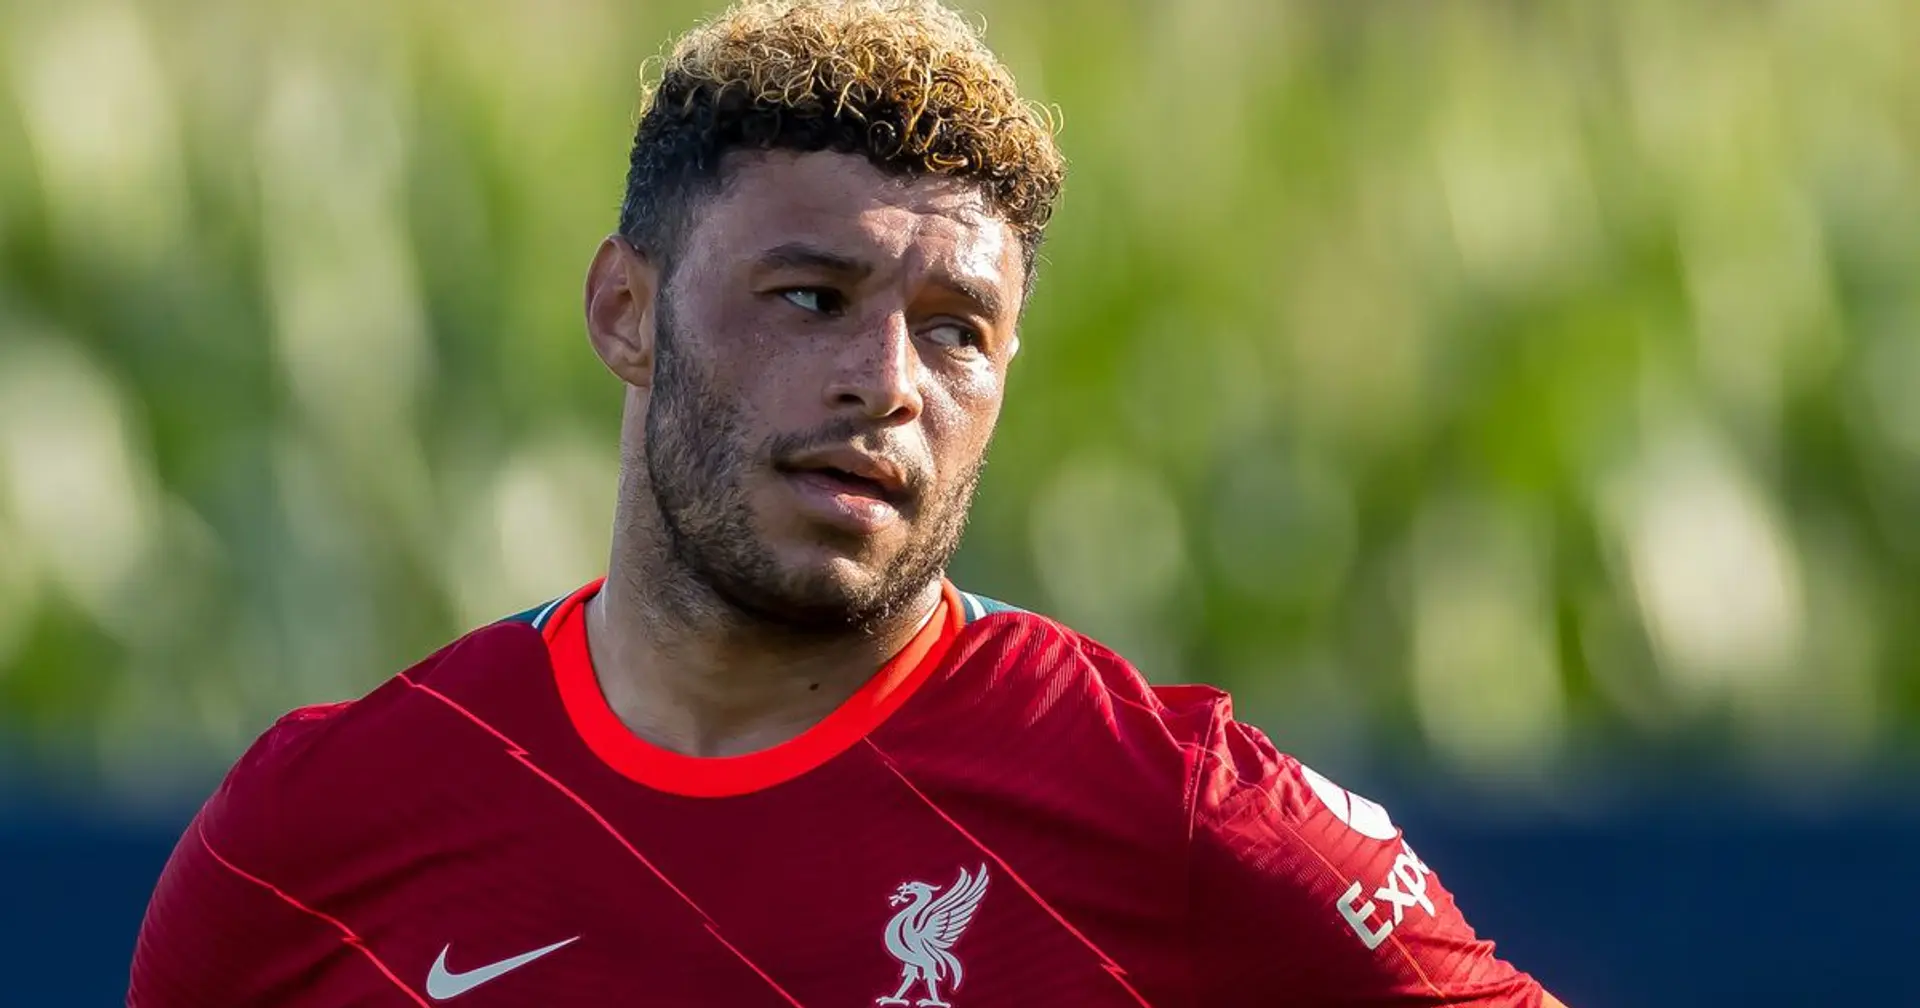 'I don't see it': Ex-PL player Nigel Jemson makes claim about Ox's future at Liverpool